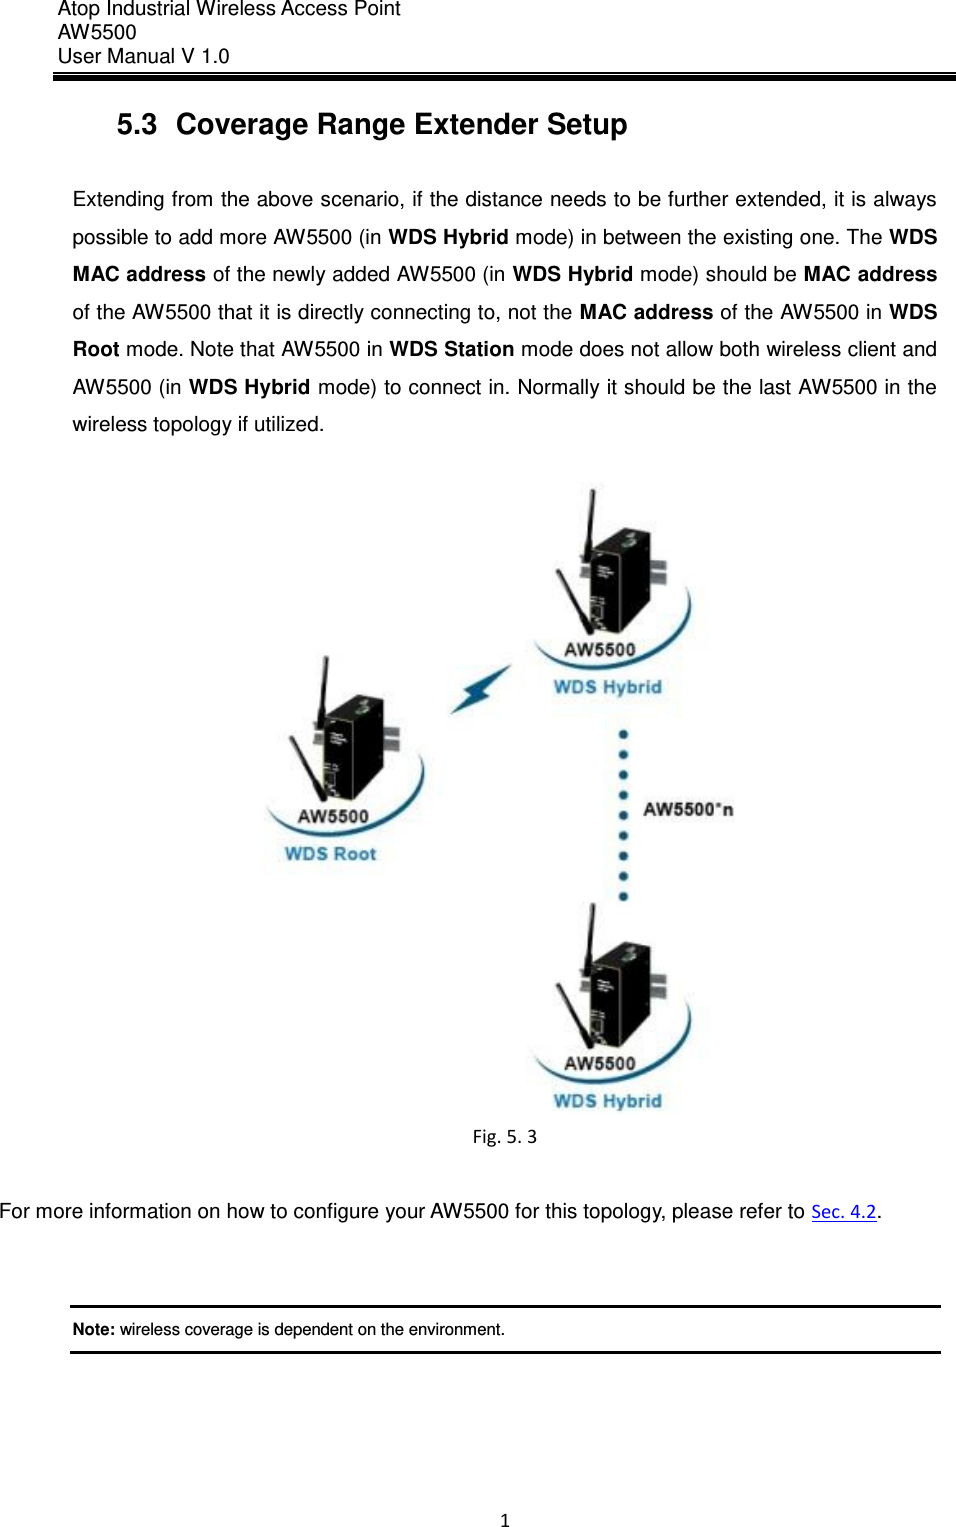 Atop Industrial Wireless Access Point AW 5500 User Manual V 1.0                      1  5.3  Coverage Range Extender Setup  Extending from the above scenario, if the distance needs to be further extended, it is always possible to add more AW5500 (in WDS Hybrid mode) in between the existing one. The WDS MAC address of the newly added AW5500 (in WDS Hybrid mode) should be MAC address of the AW5500 that it is directly connecting to, not the MAC address of the AW5500 in WDS Root mode. Note that AW5500 in WDS Station mode does not allow both wireless client and AW5500 (in WDS Hybrid mode) to connect in. Normally it should be the last AW5500 in the wireless topology if utilized.   Fig. 5. 3  For more information on how to configure your AW5500 for this topology, please refer to Sec. 4.2.   Note: wireless coverage is dependent on the environment.   